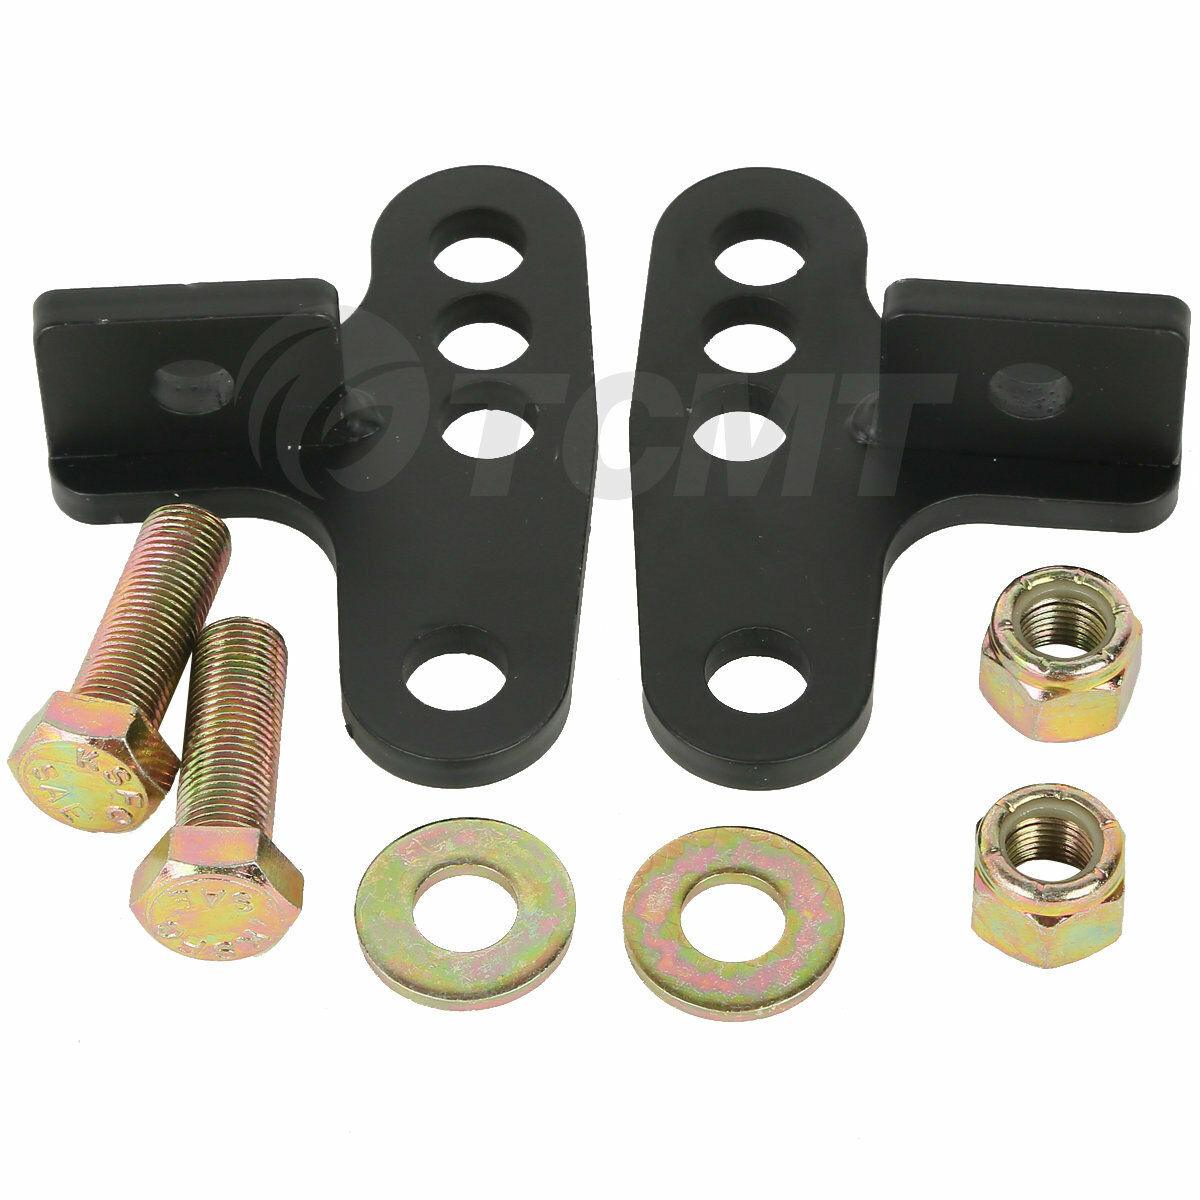 1-3" Adjustable Rear Lowering Drop Kit For Harley Sportster XL883 1200 1988-1999 - Moto Life Products